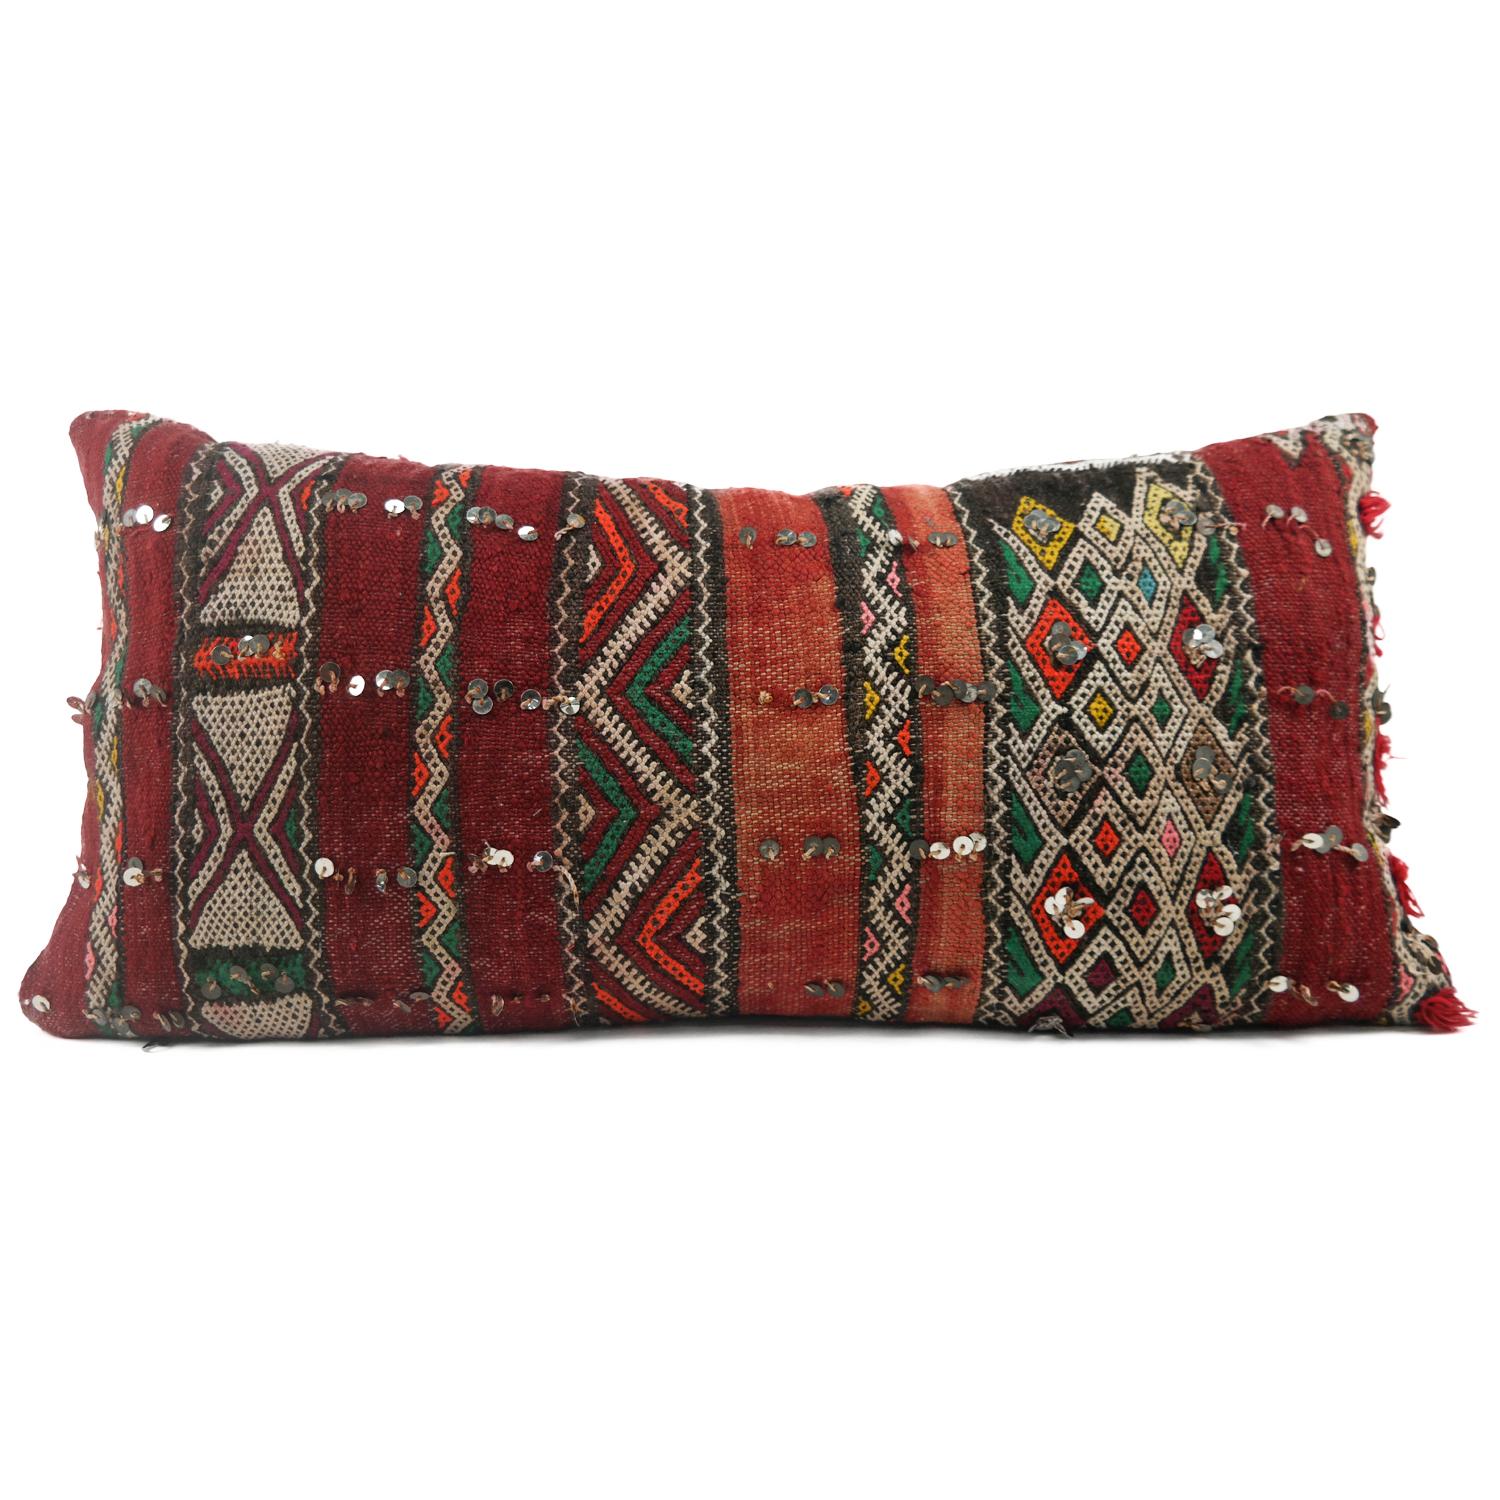 A stunning extra large Bohemian Moroccan Kilim cushion custom made in Morocco. Cut from a circa 40 years old hand loomed Kilim rug, from the Middle Atlas Mountains. We have searched and selected the rug ourselves. The pillow has beautiful colors